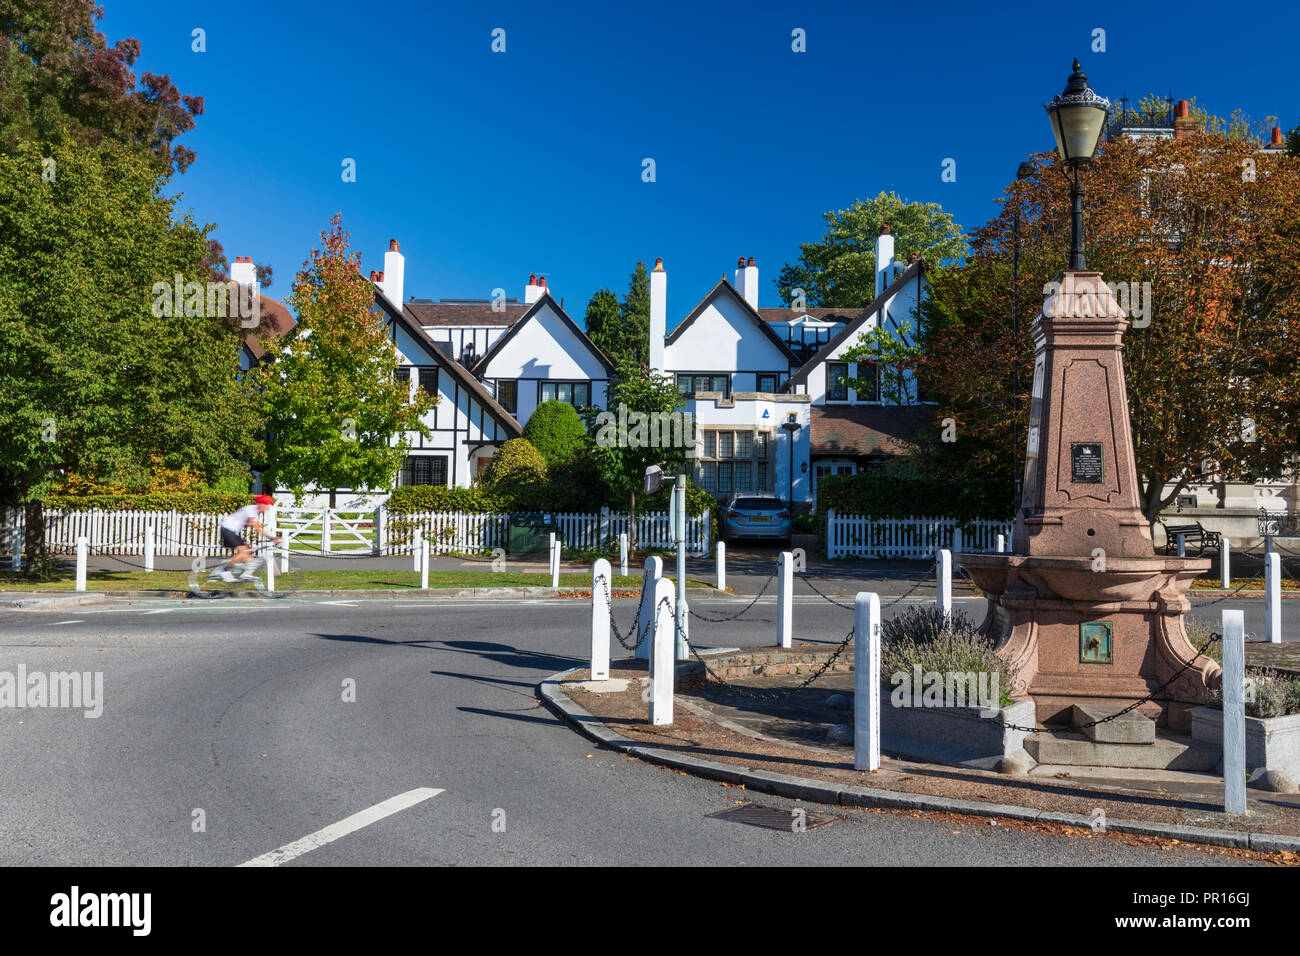 Residential housing in Dulwich Village, south London, England, United Kingdom Stock Photo